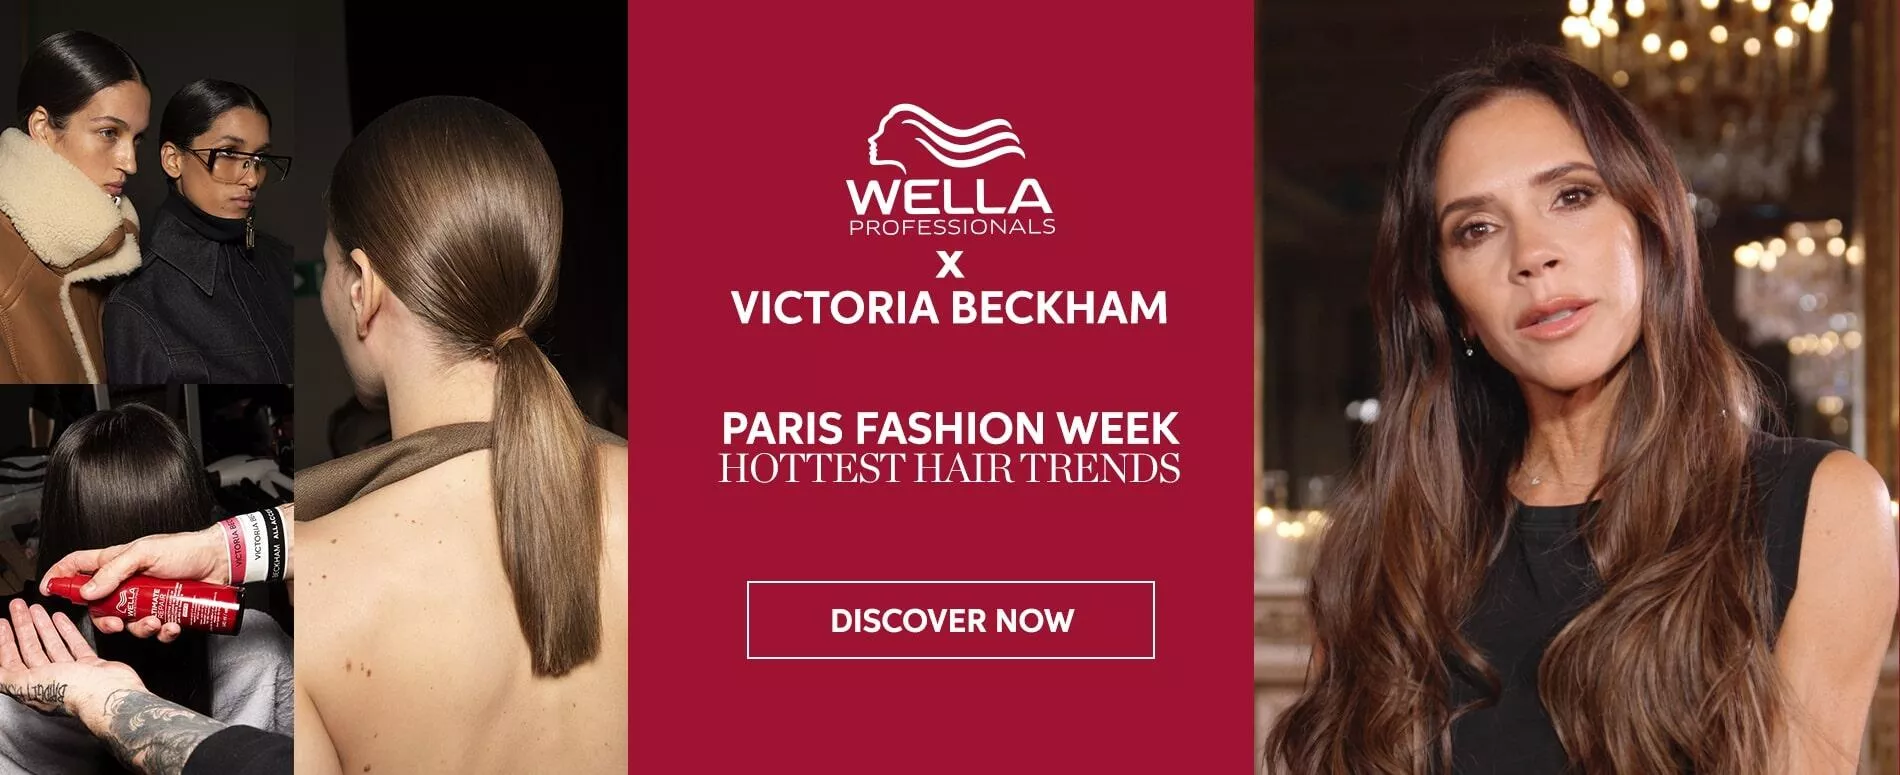 Victoria Beckham x Wella Hair Trends banner with discover button